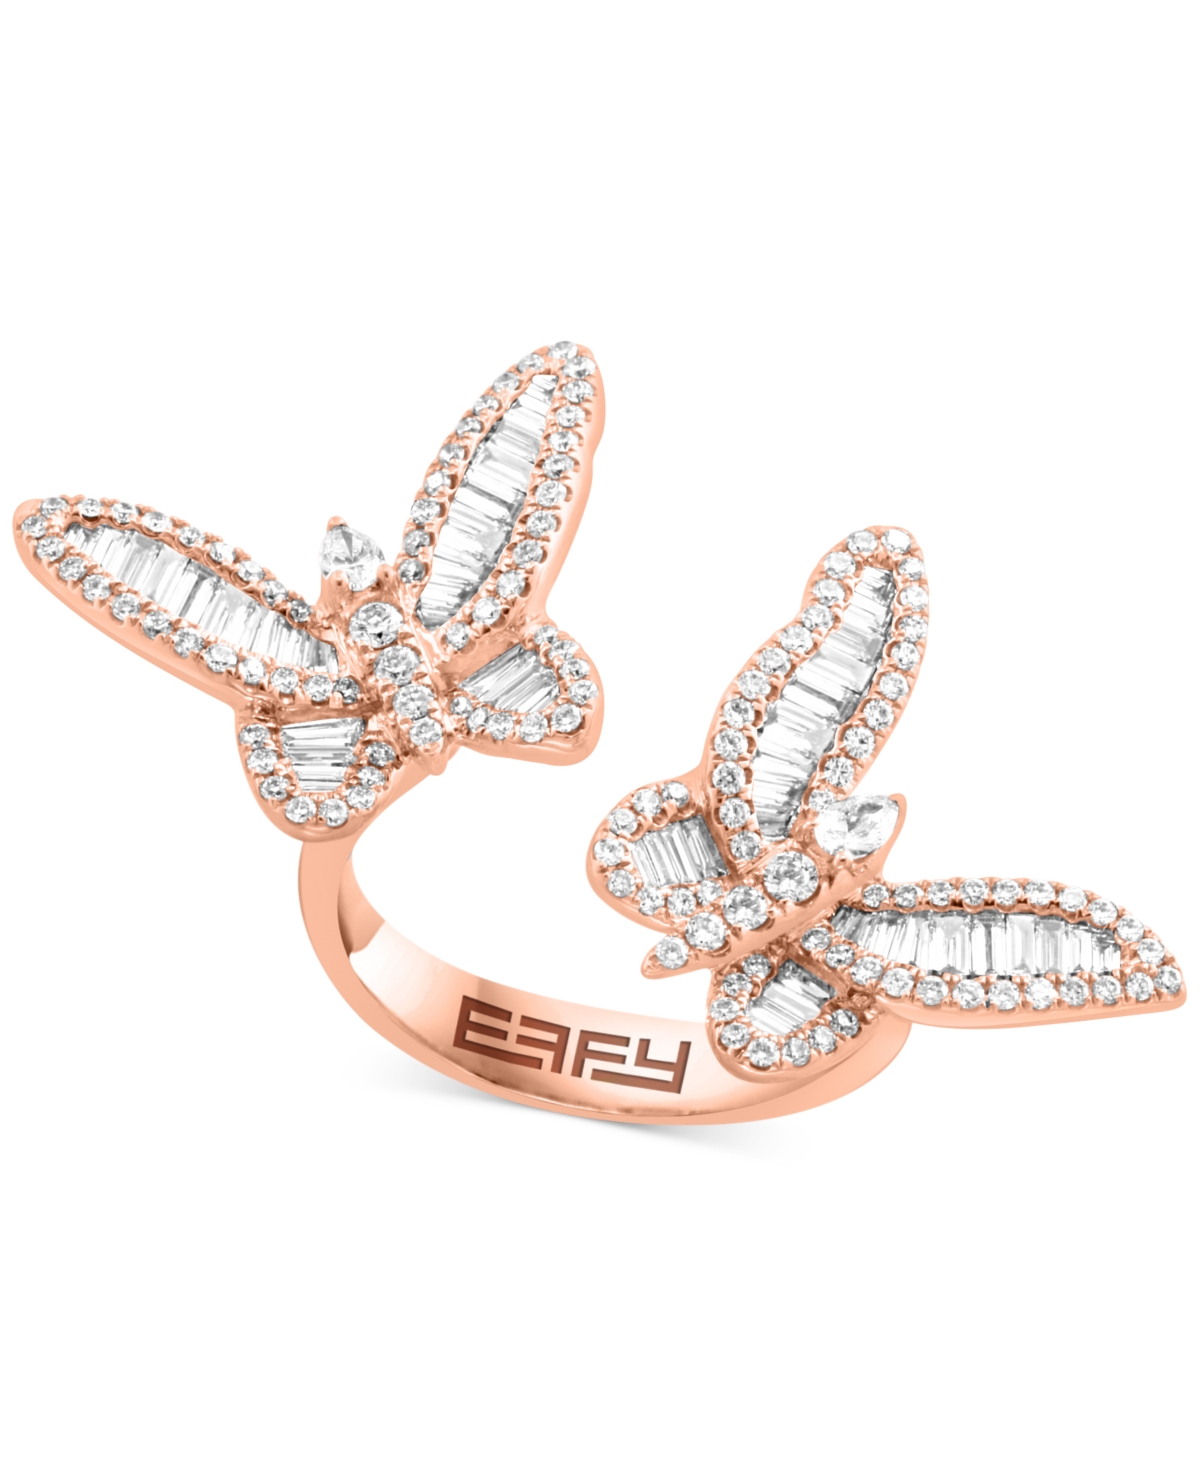 Effy Diamond Round & Baguette Butterfly Cuff Ring (1-1/3 ct. t.w.) in 14k Rose Gold - Rose Gld